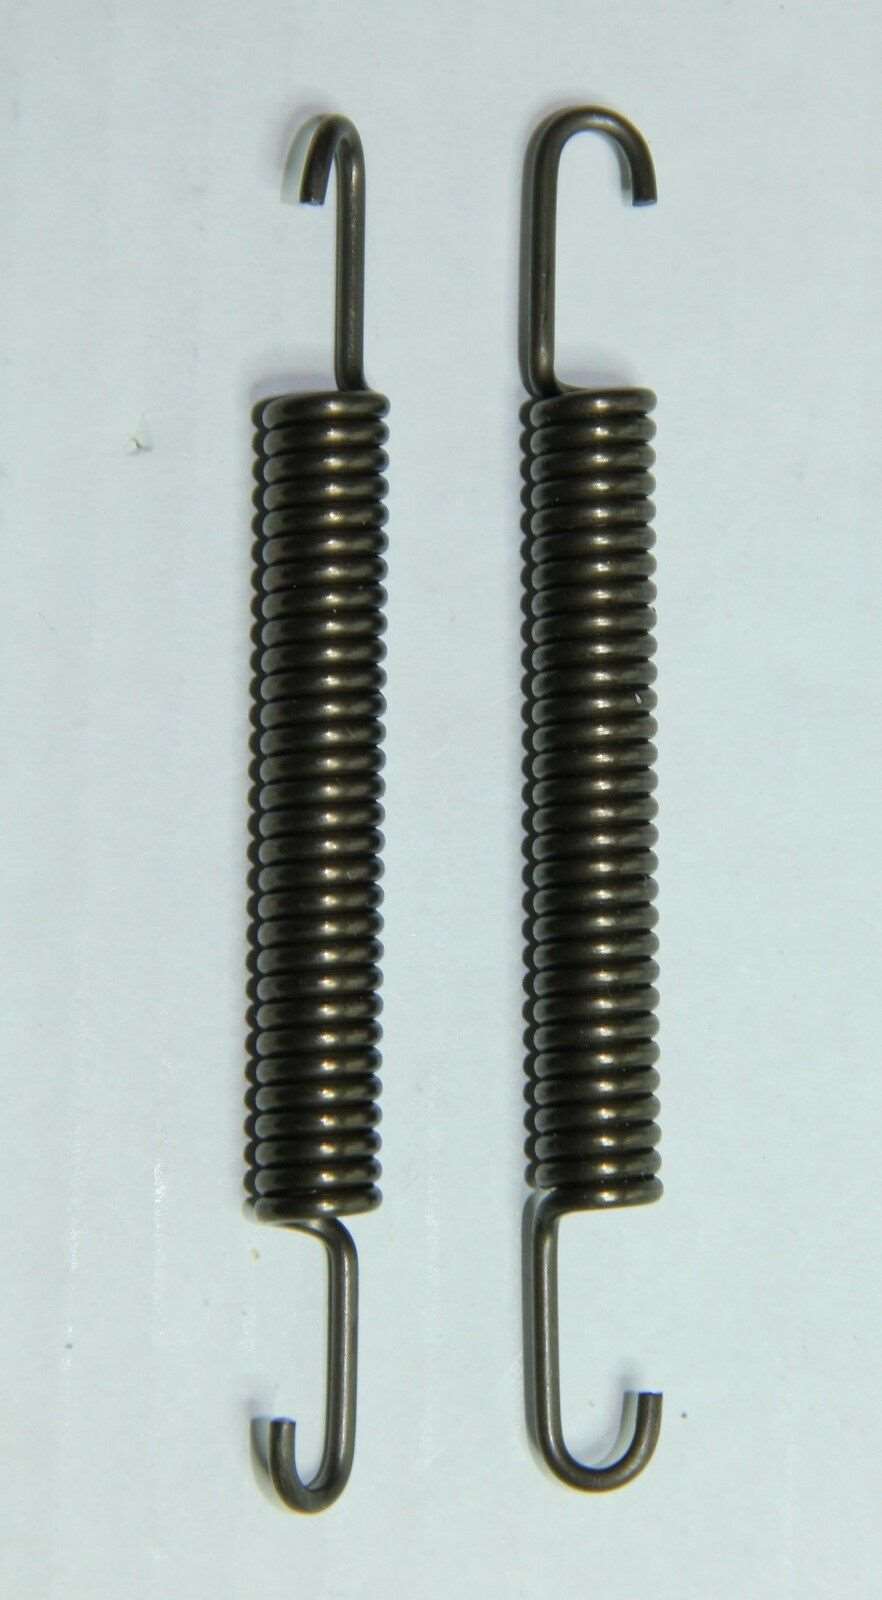 2x CLASSIC FIAT 500 BRAKE SPRING FRONT OR REAR BRAND NEW HIGH QUALITY